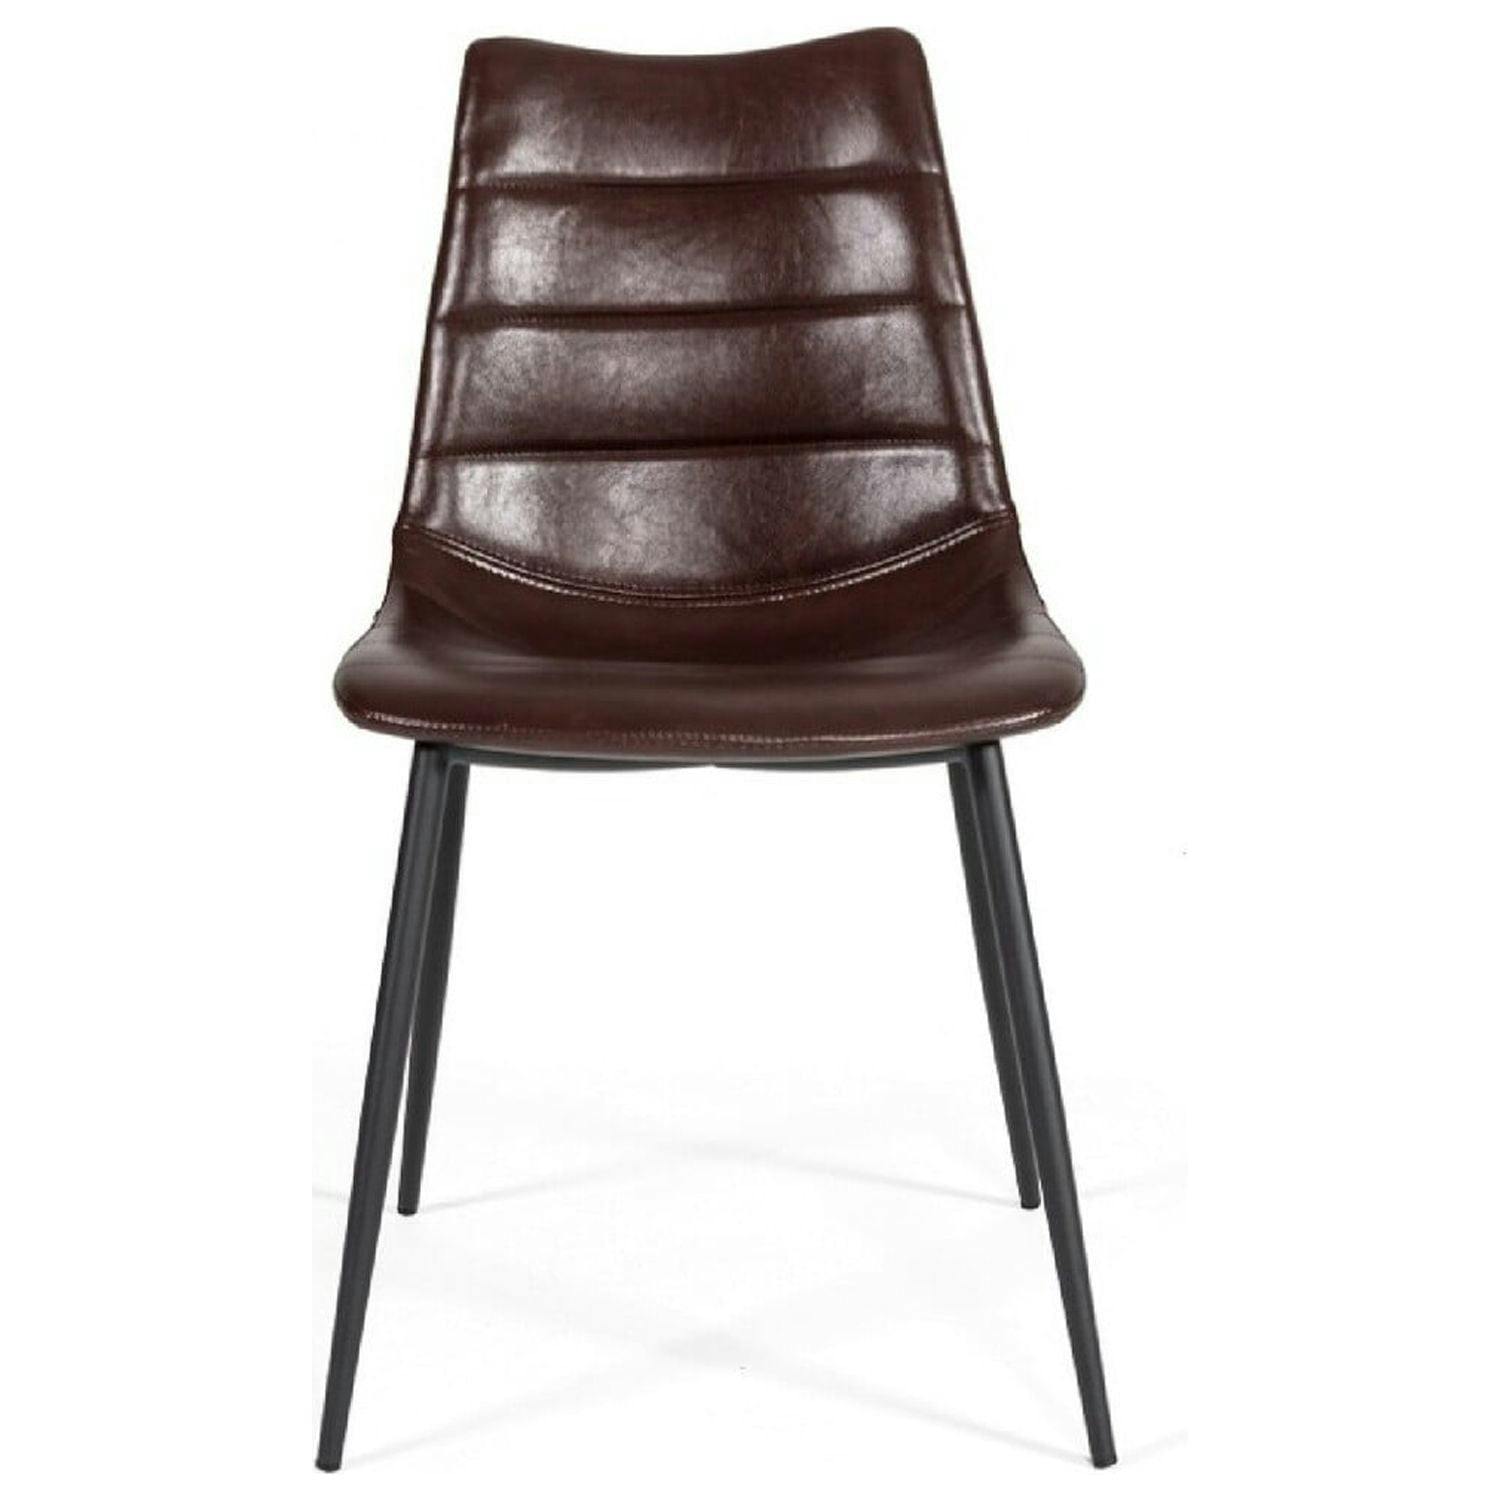 High-Back Black Faux Leather Side Chair with Metal Legs